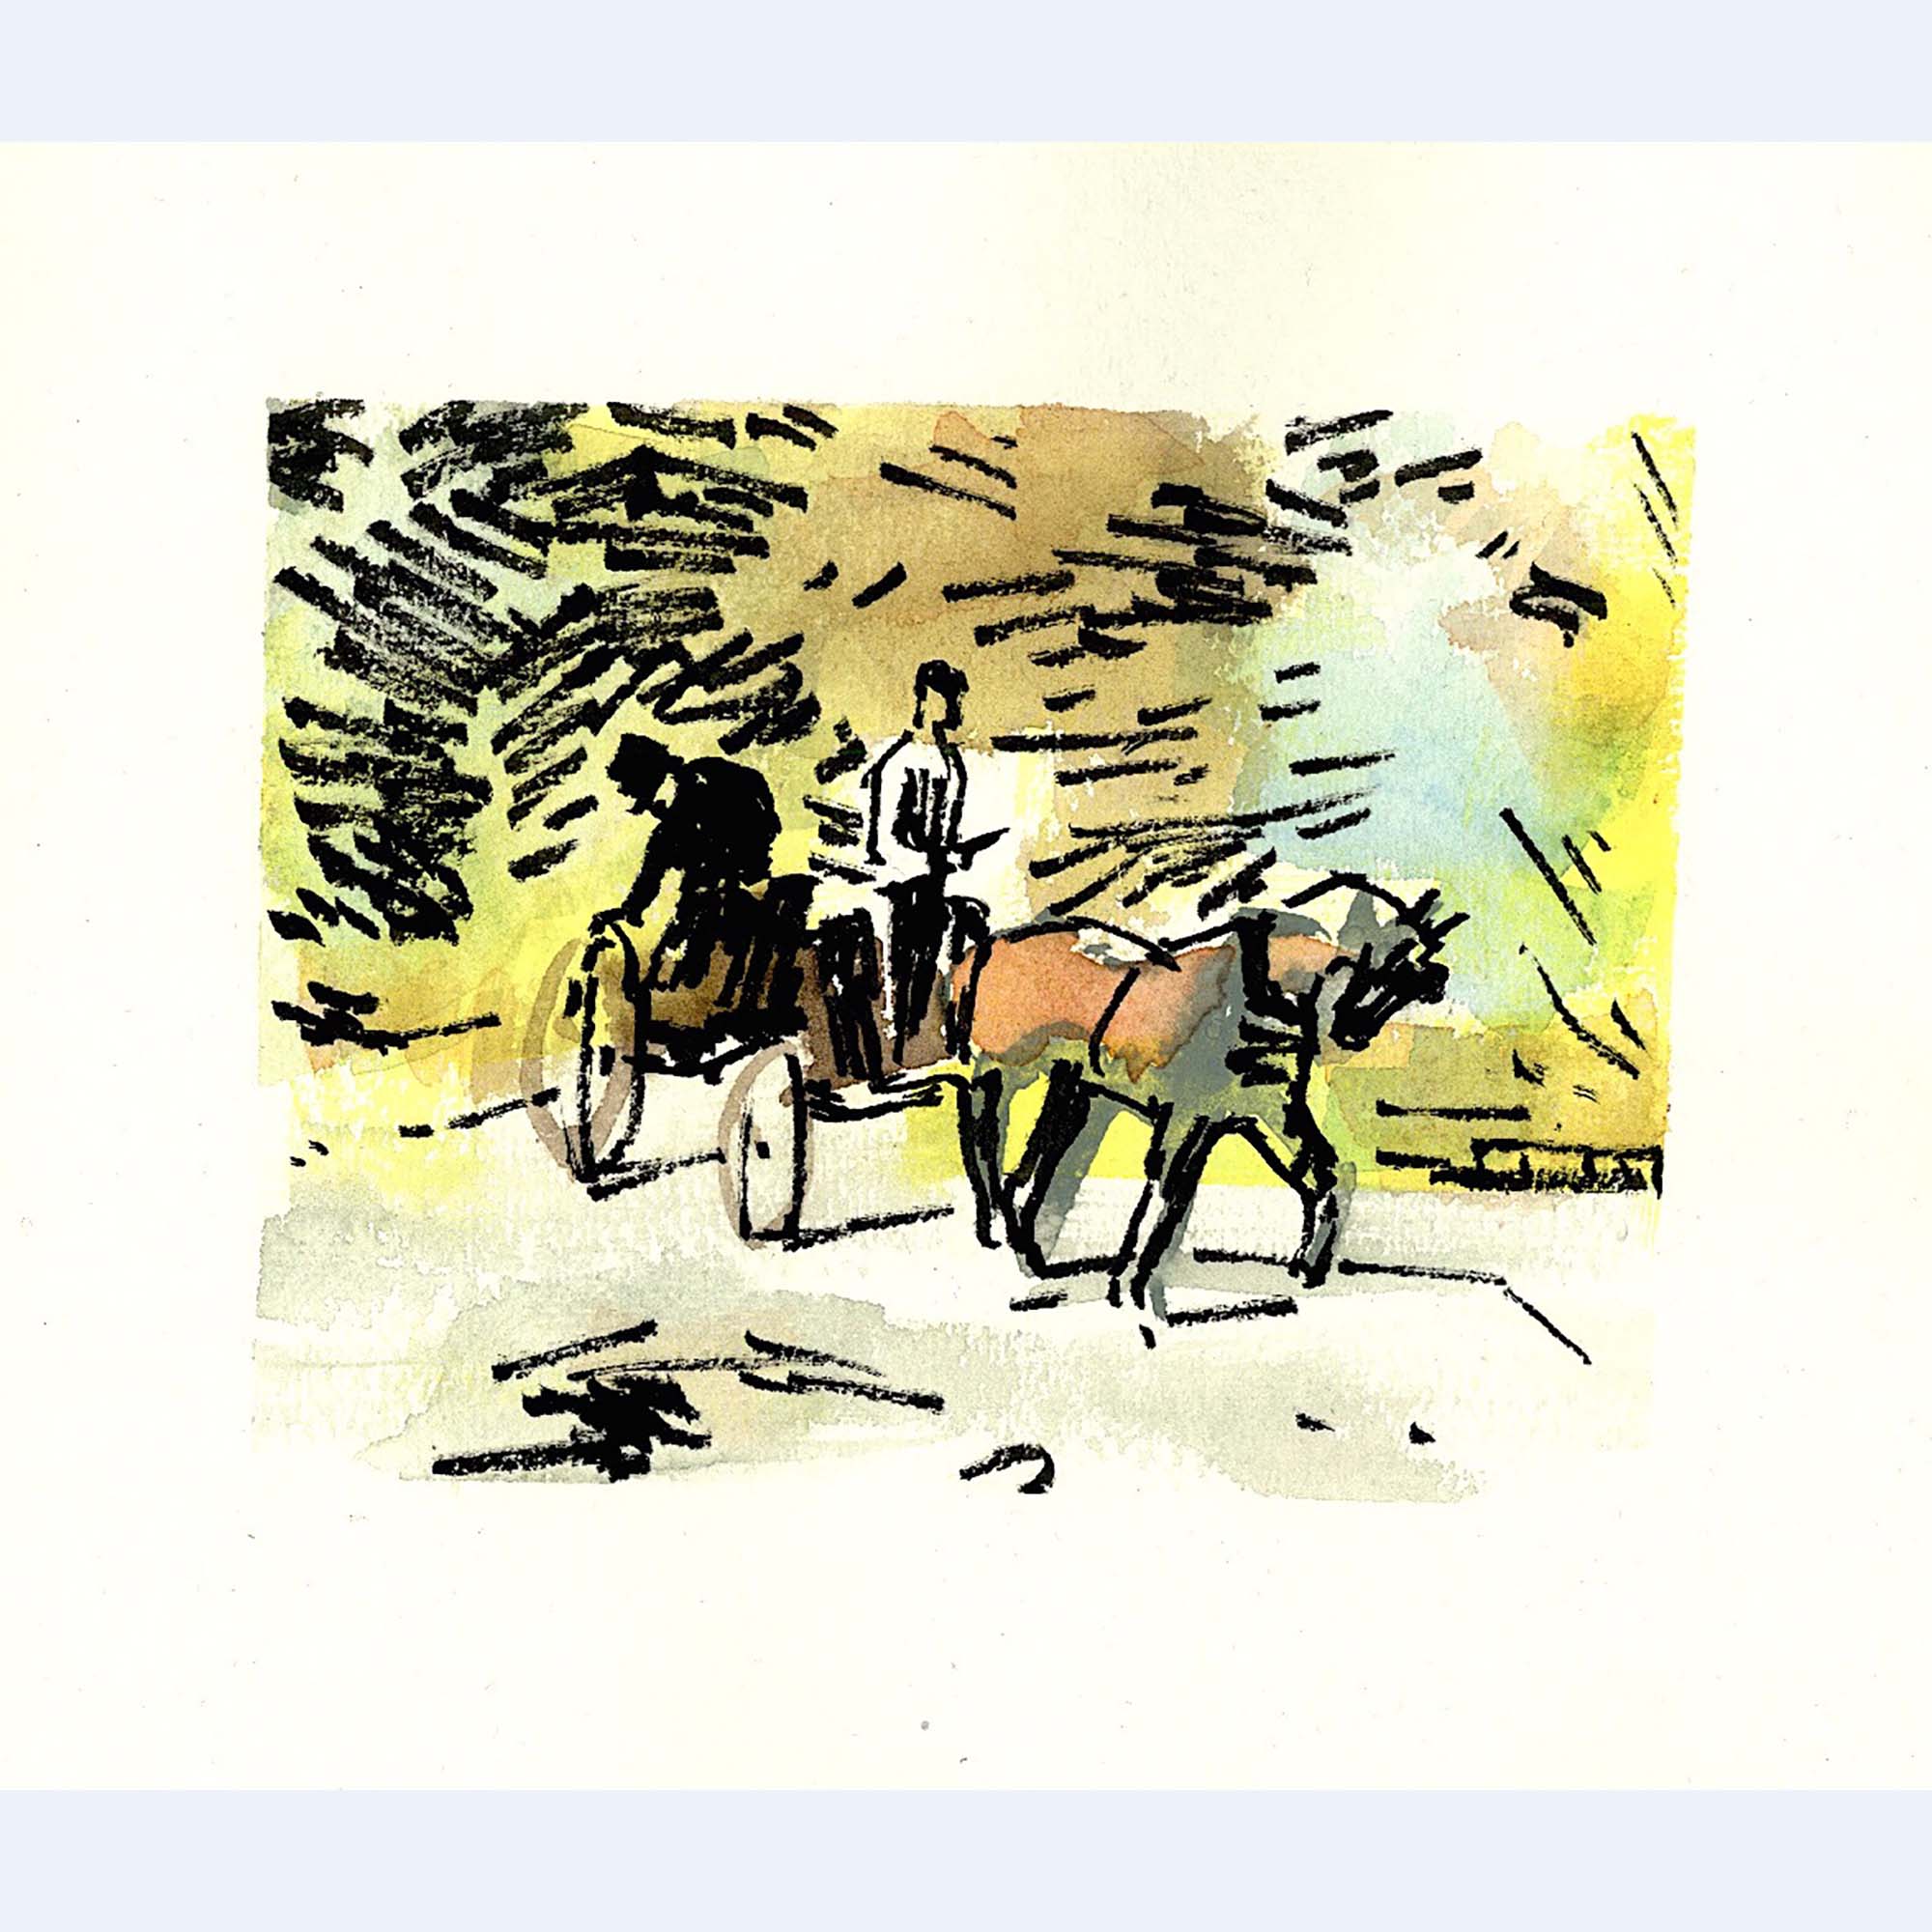 one horse carriage with two men standing in it, riding through woodland scenery